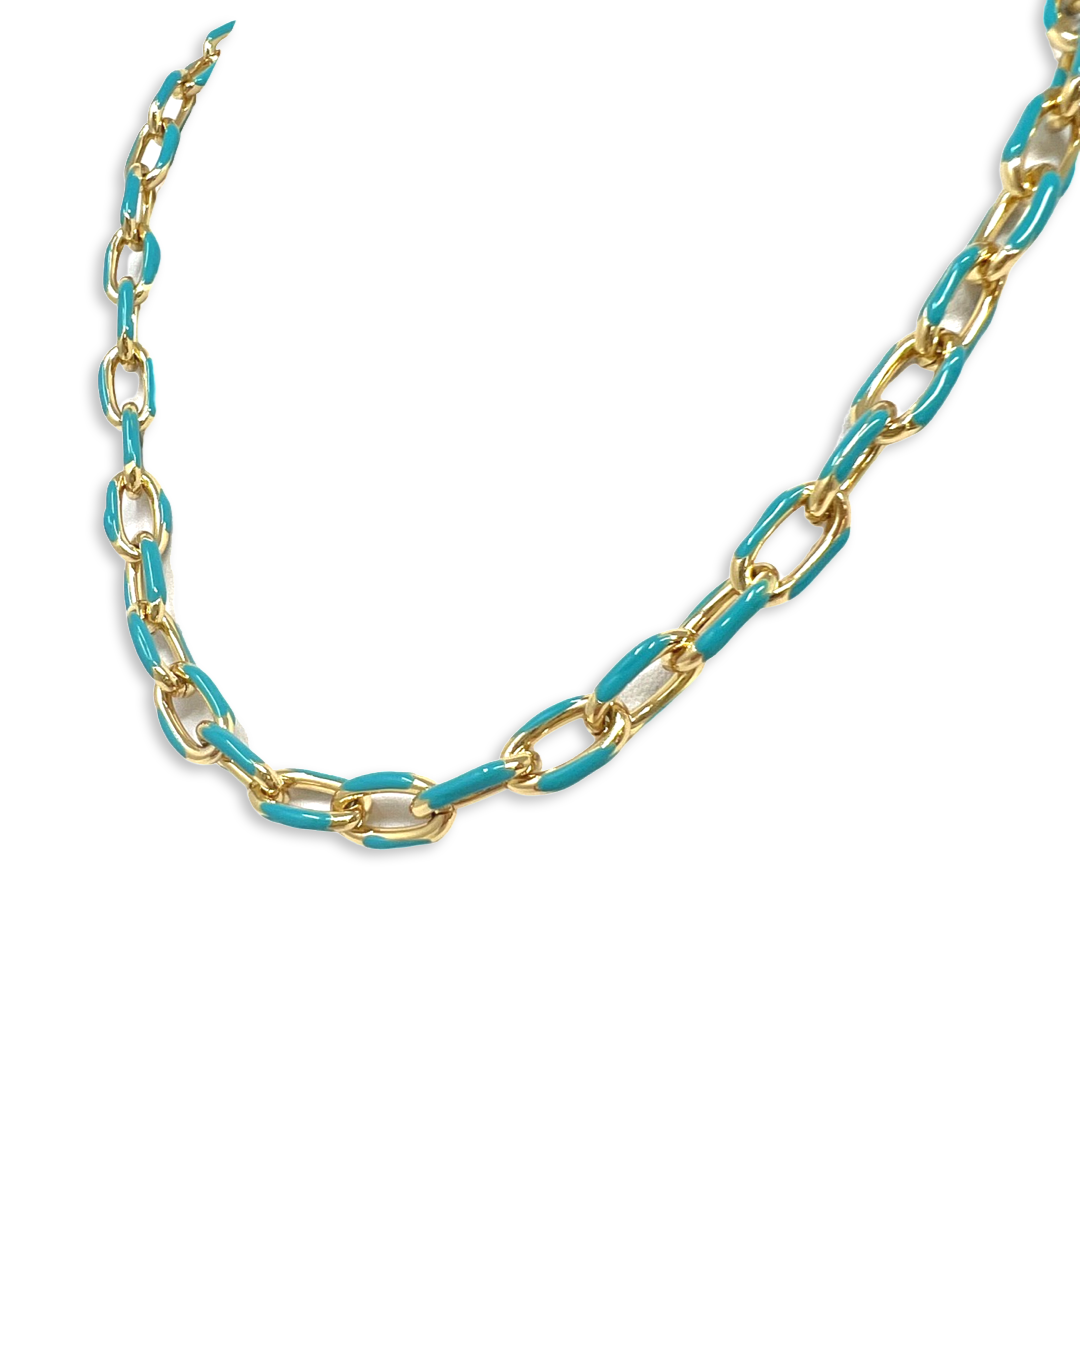 Enamel Chainlink Necklace in Gold with Turquoise